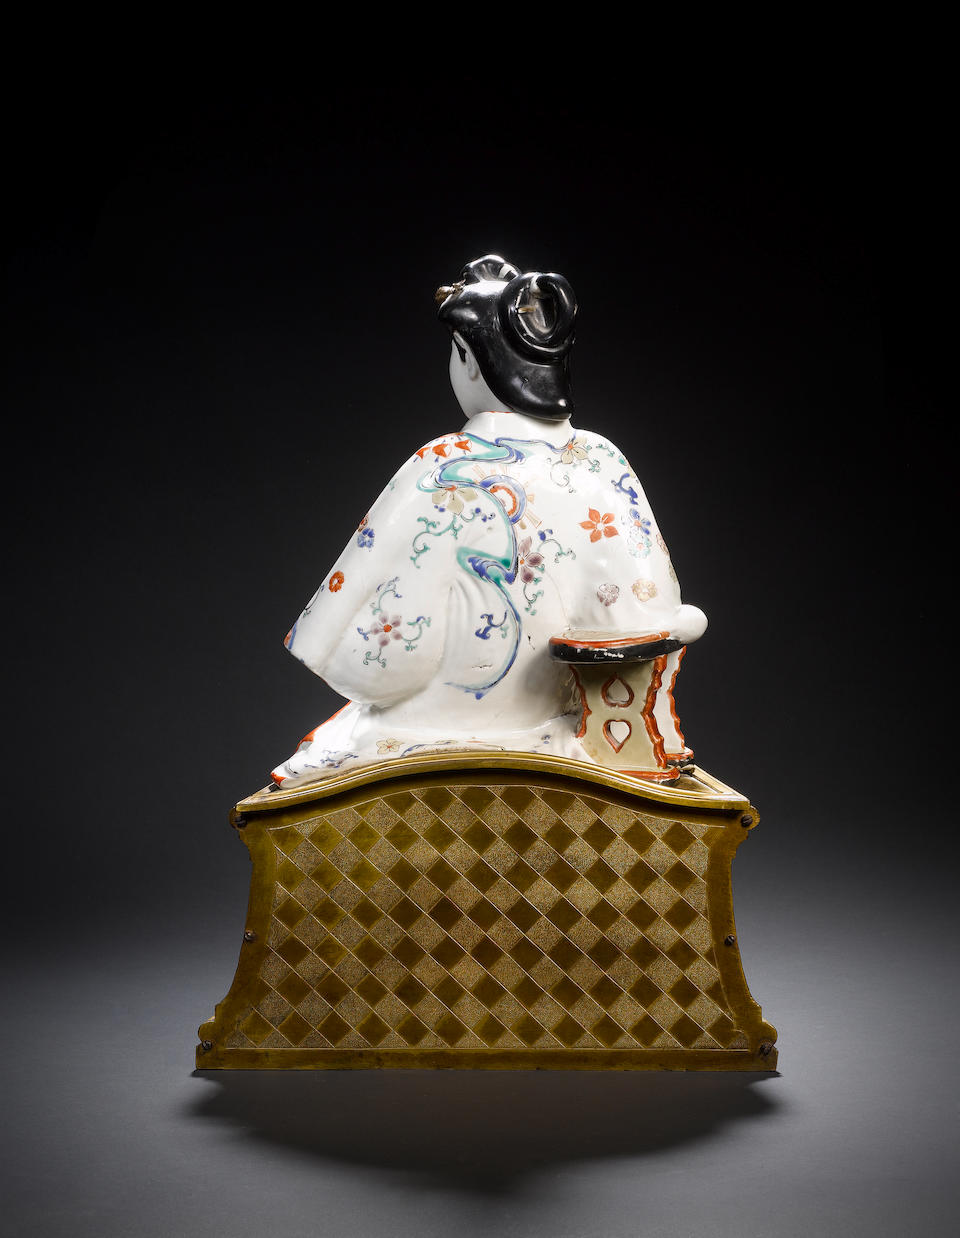 A rare ormolu-mounted Kakiemon model of a seated bijin The figure Japanese, Edo Period, circa 1670-1680, the ormolu mount French, probably Transitional-Louis XVI, circa 1760-1770, the plaque Chinese Kangxi, early 18th century